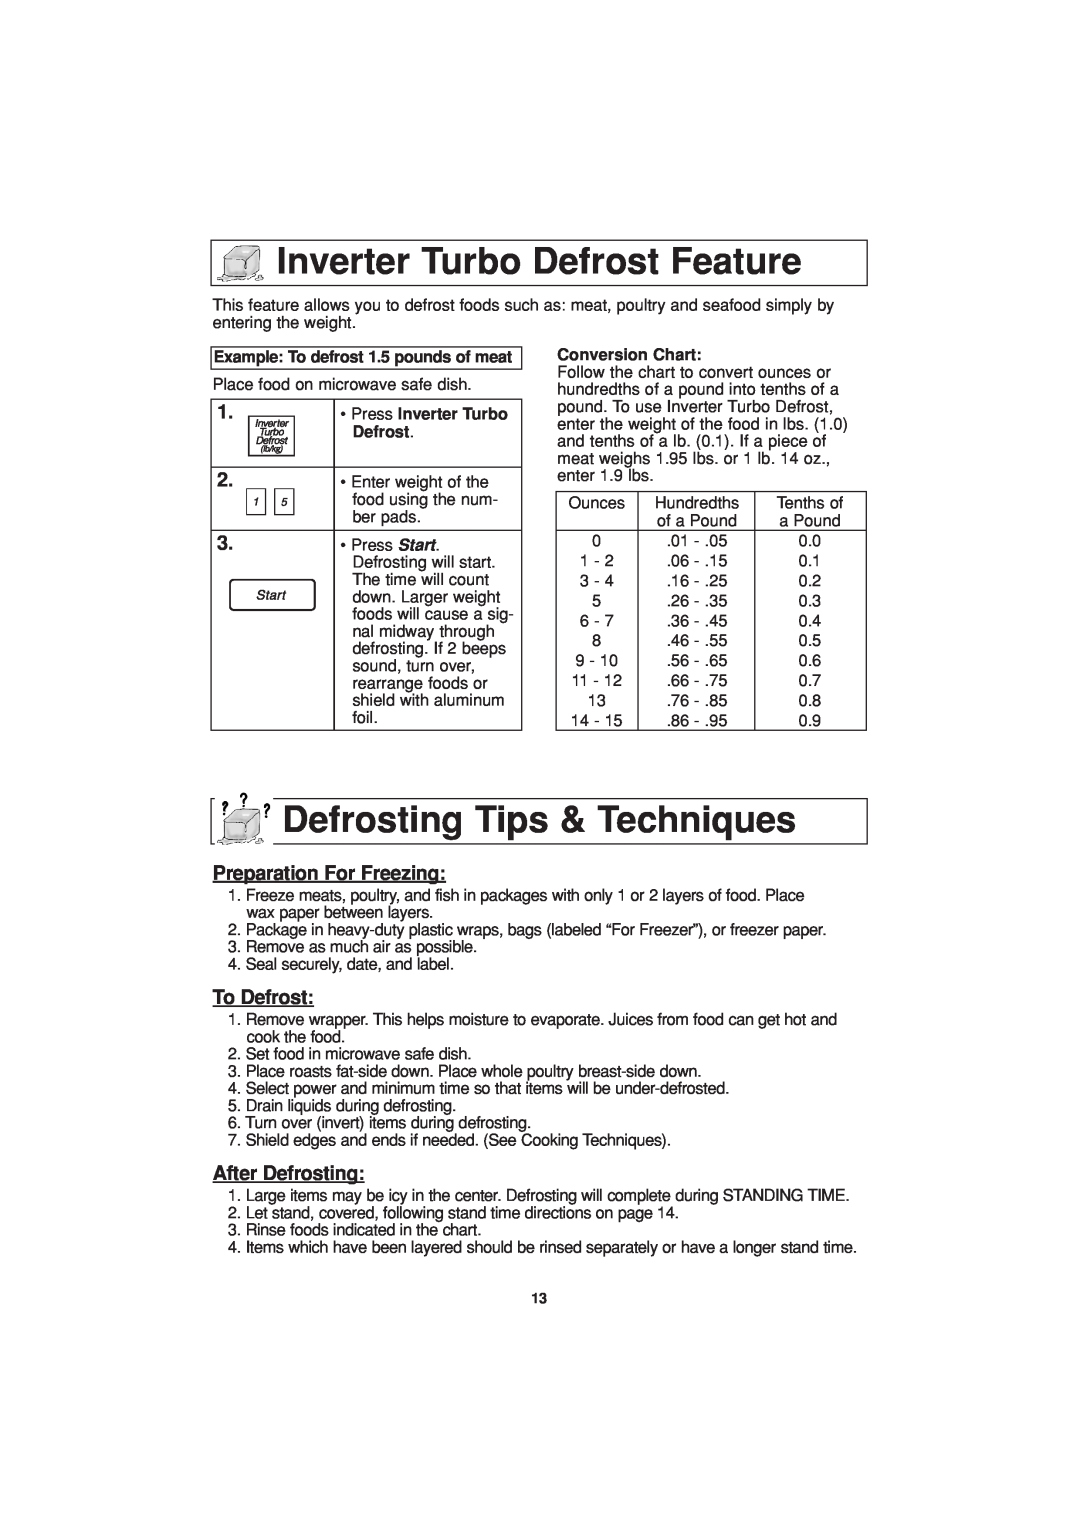 Panasonic NN-H624 Inverter Turbo Defrost Feature, Defrosting Tips & Techniques, Preparation For Freezing, To Defrost 